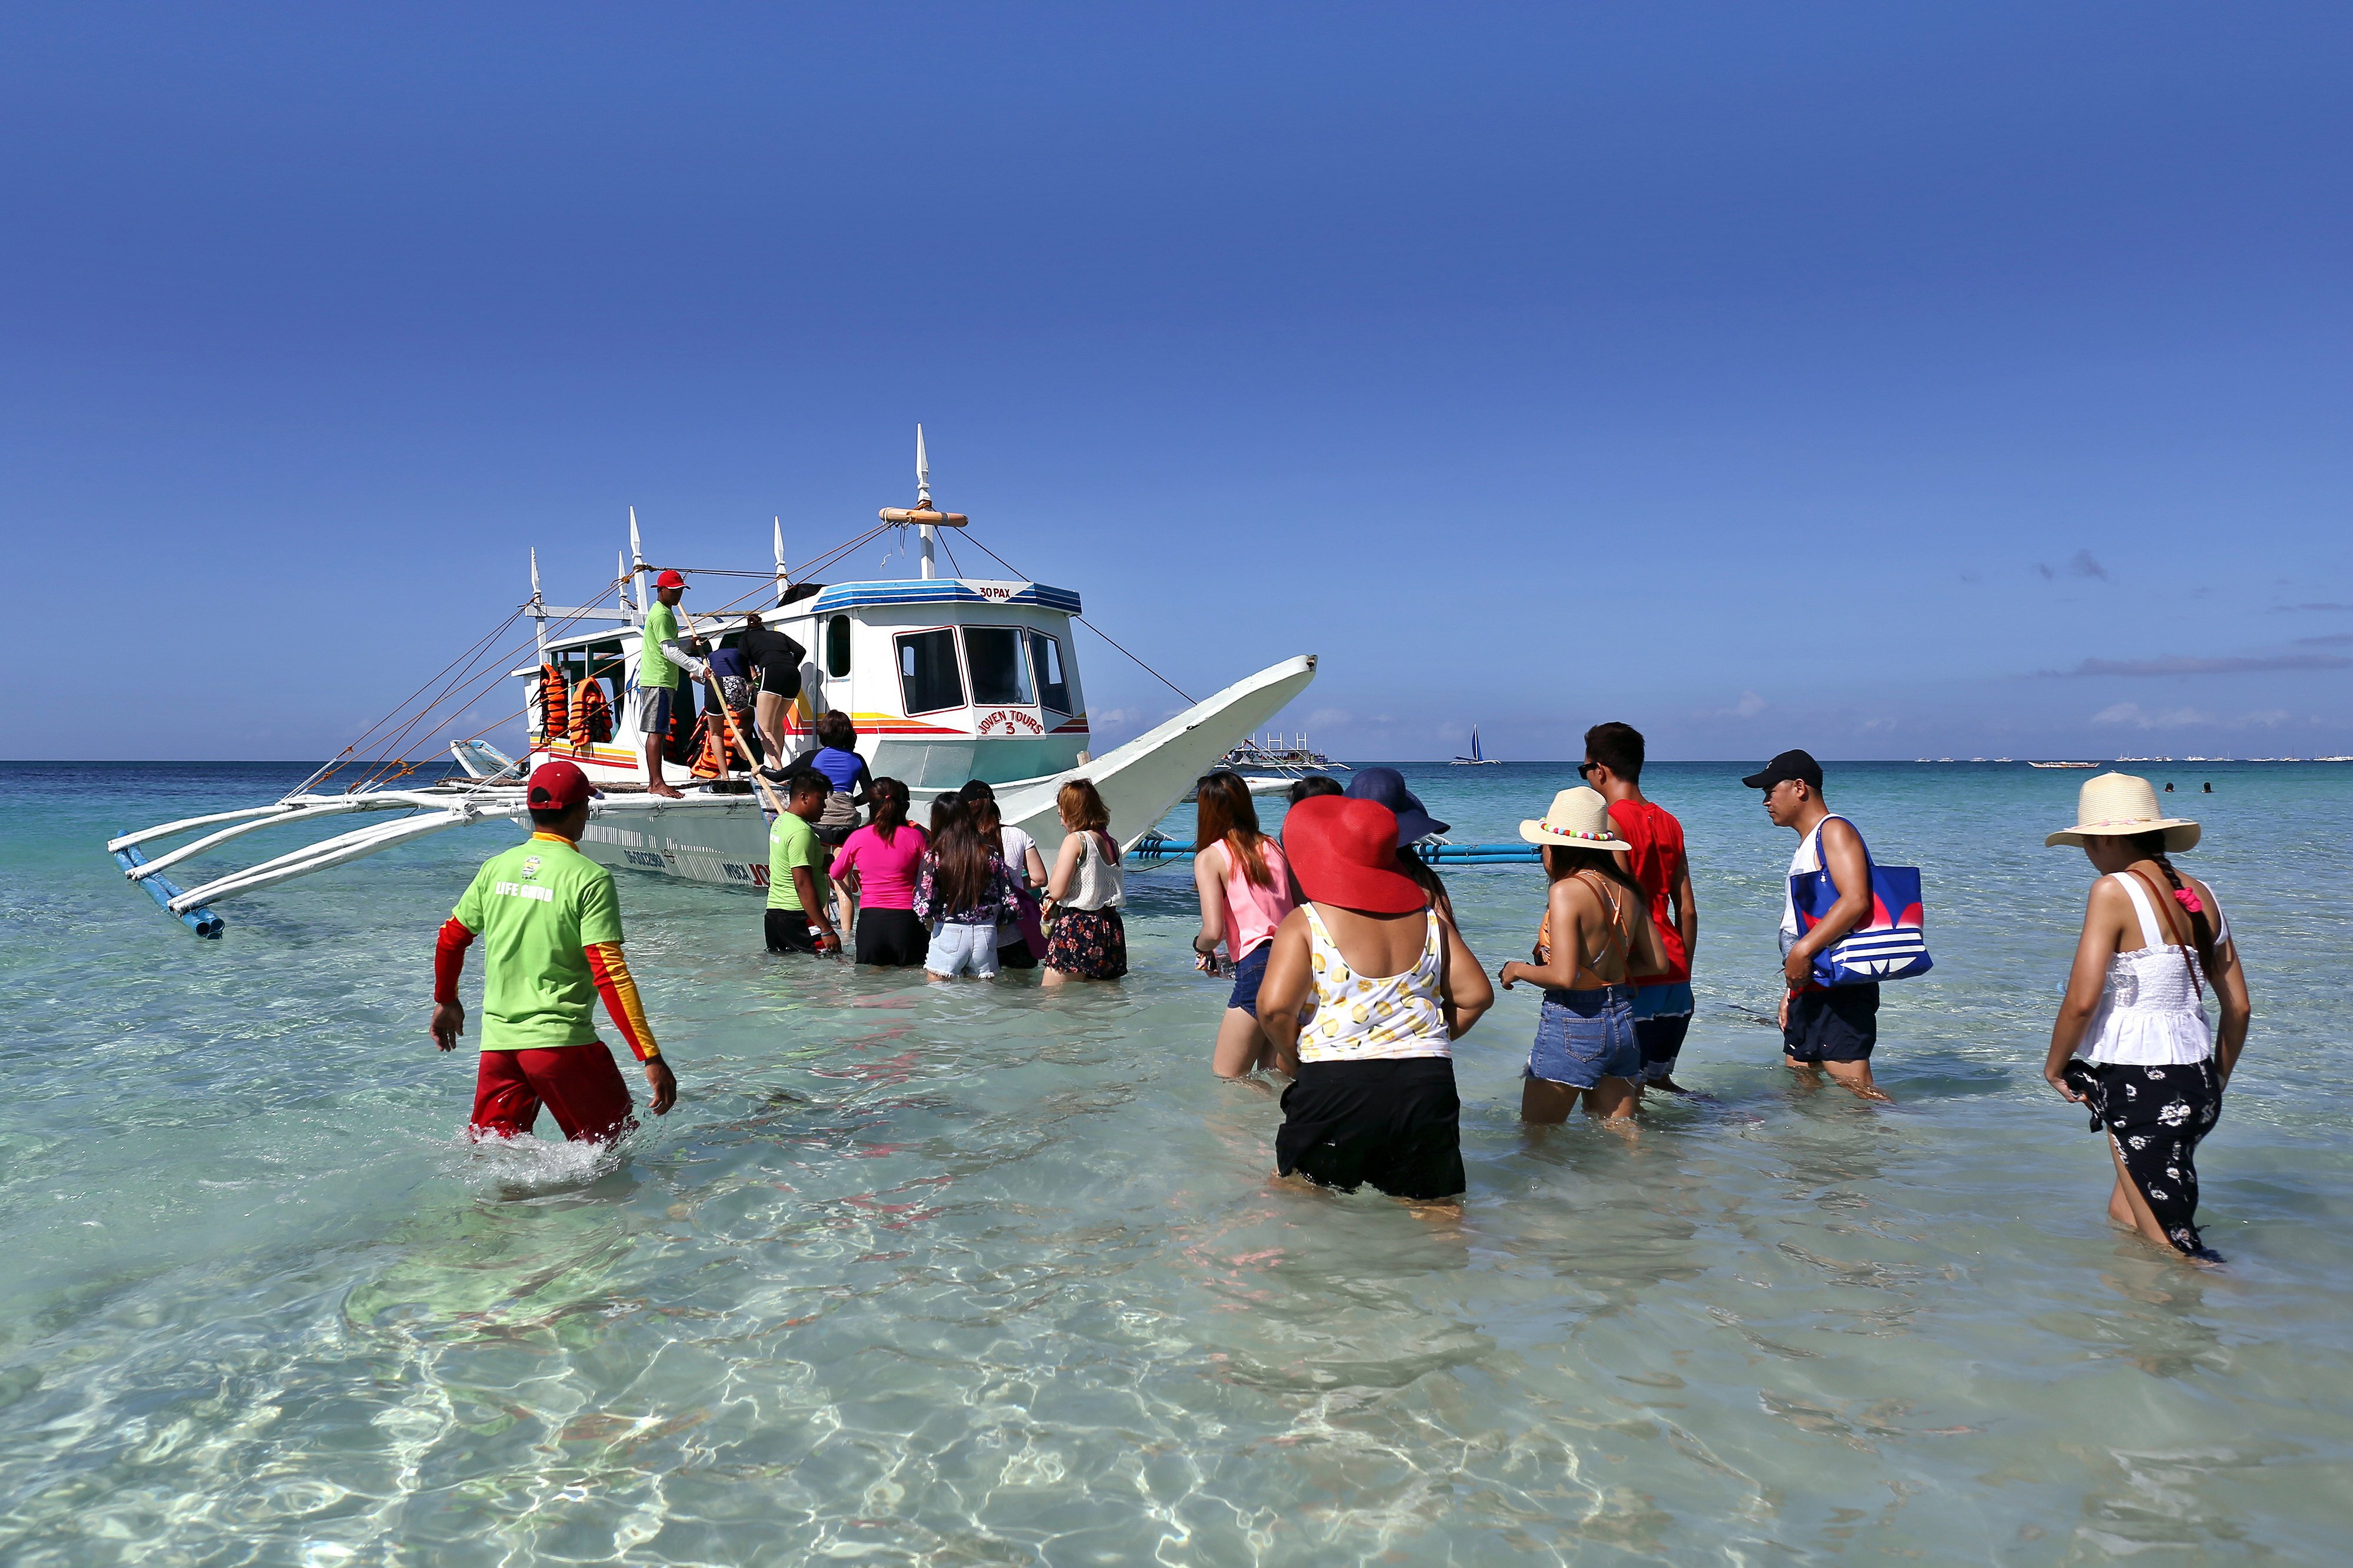 Tourists board a boat on a Boracay beach in the Philippines on December 10, 2018. More than 90 per cent of tourism workers have been fully vaccinated in the country’s tourism-dependent destinations such as Boracay, compared with only 30 per cent of the country as a whole. Photo: Getty Images